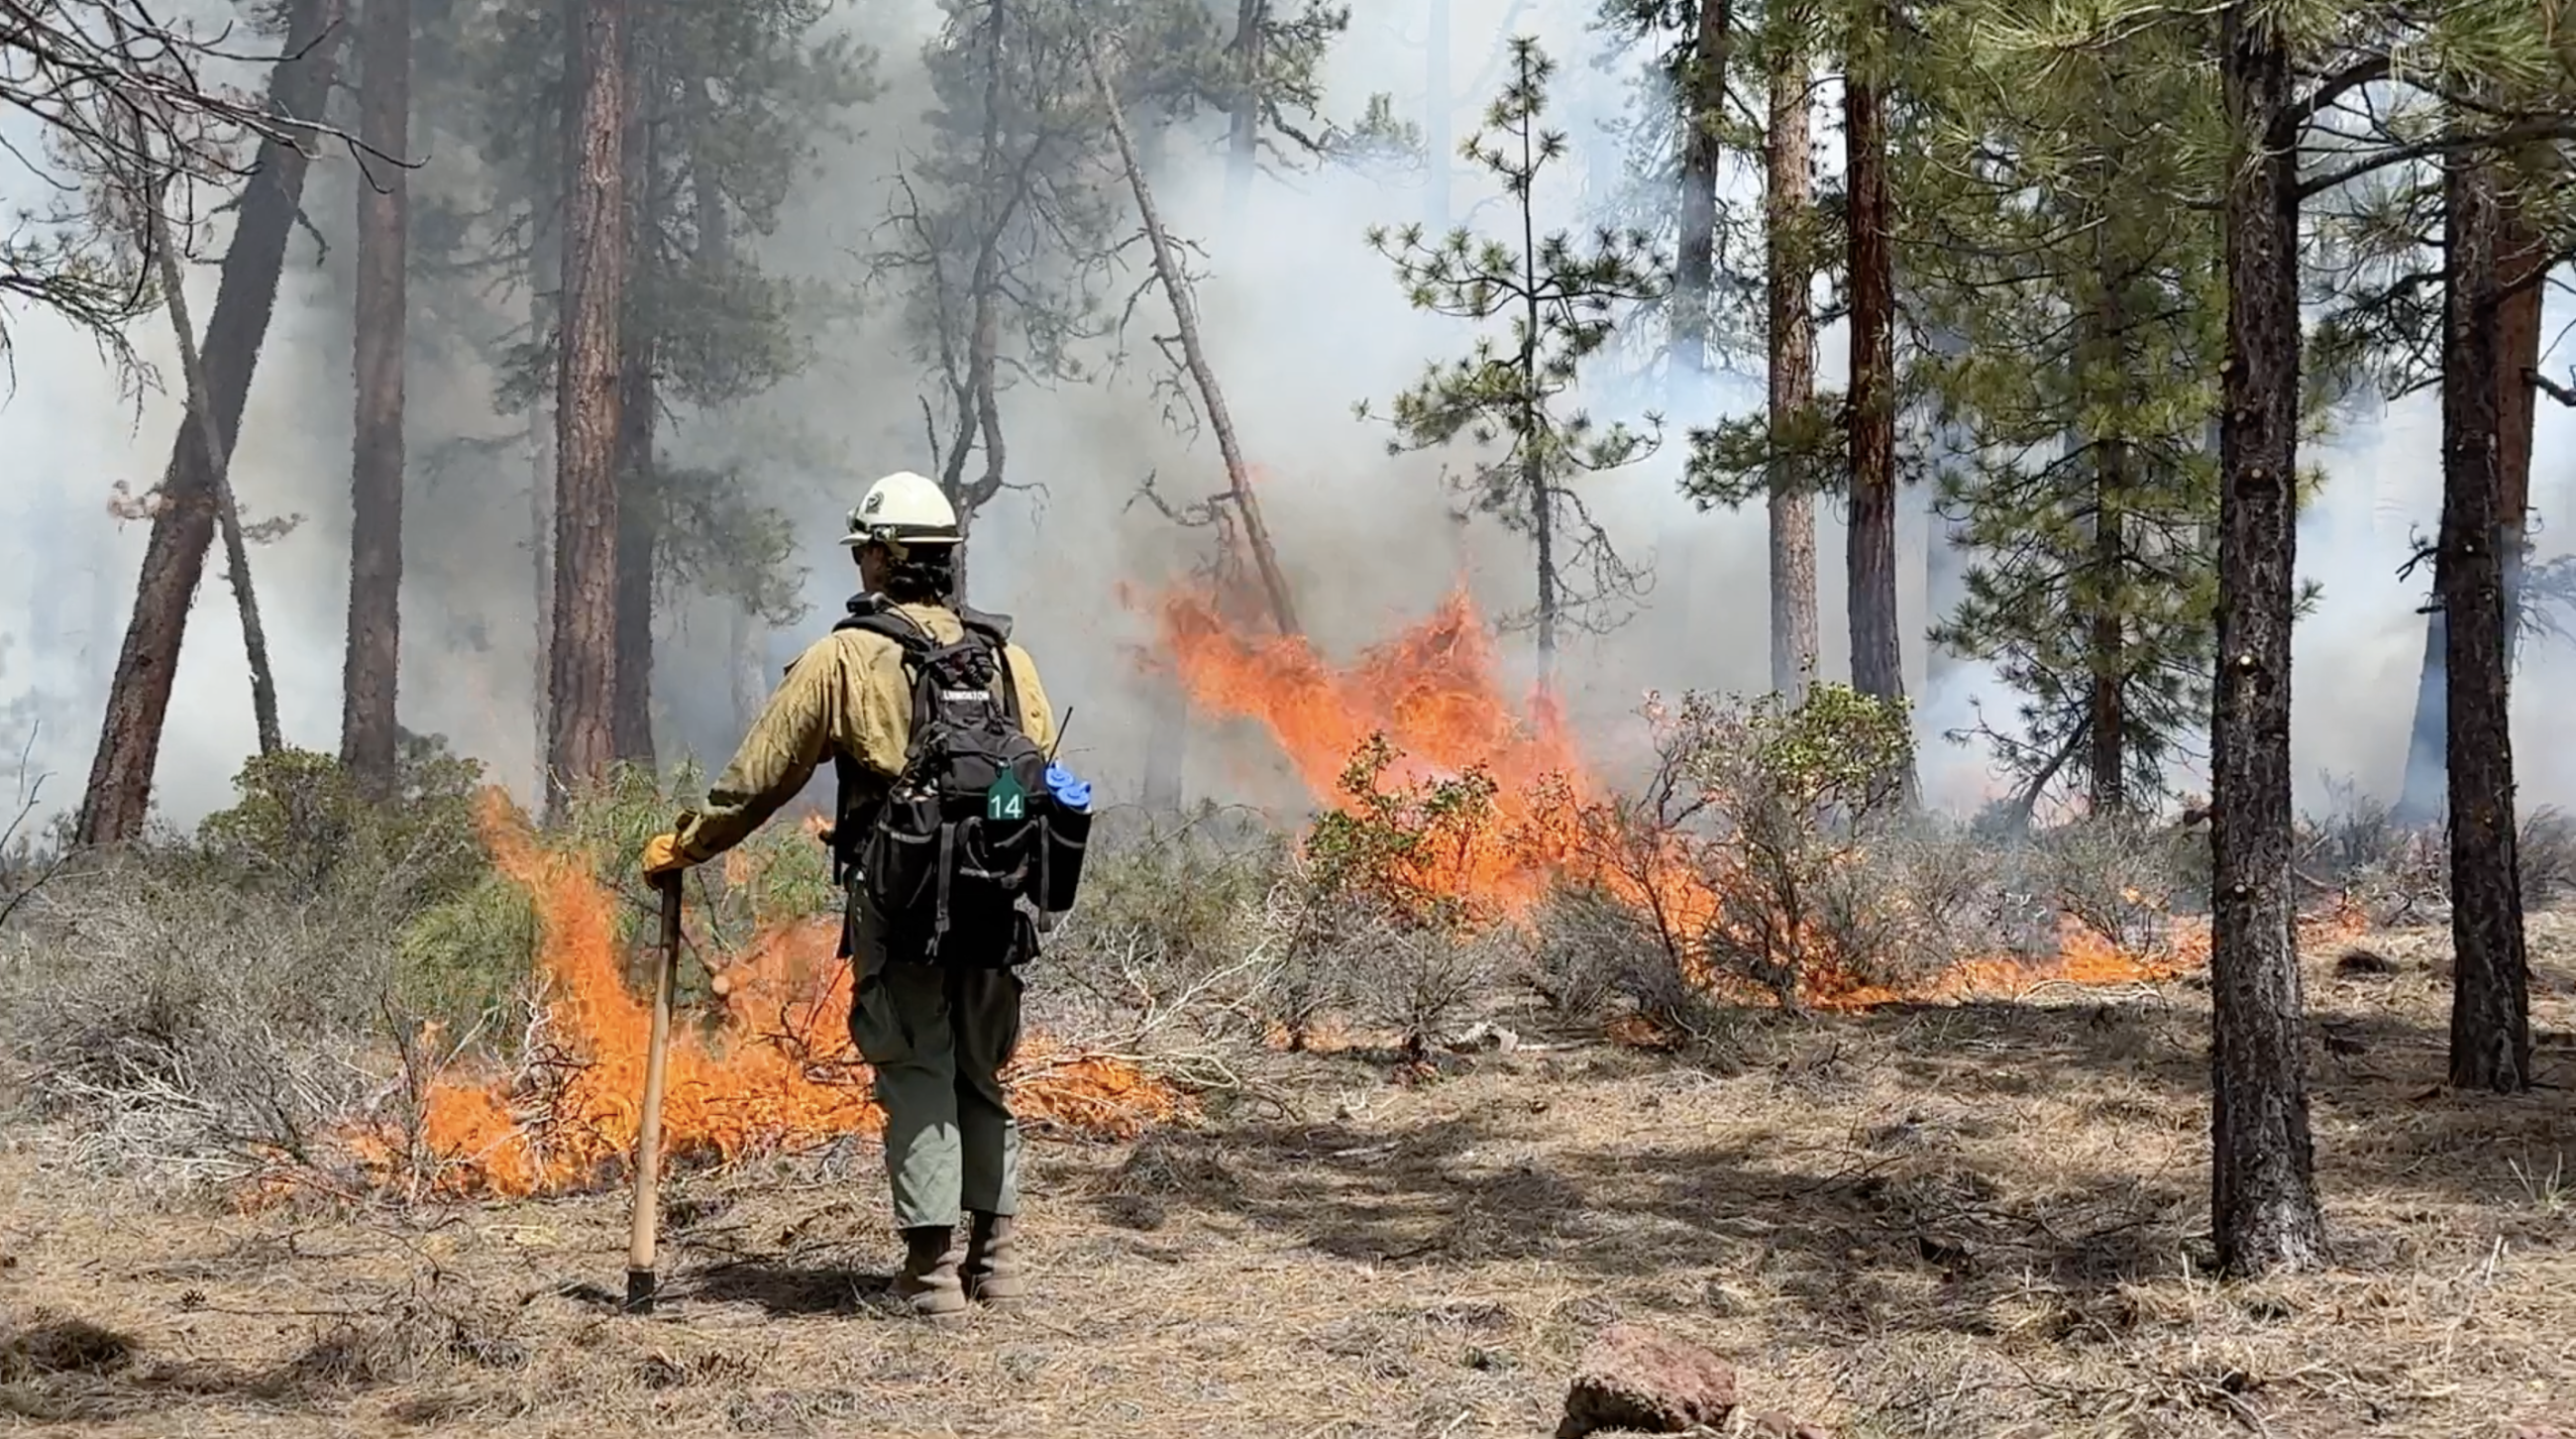 A wildland firefighter stands in front of flames in a forest